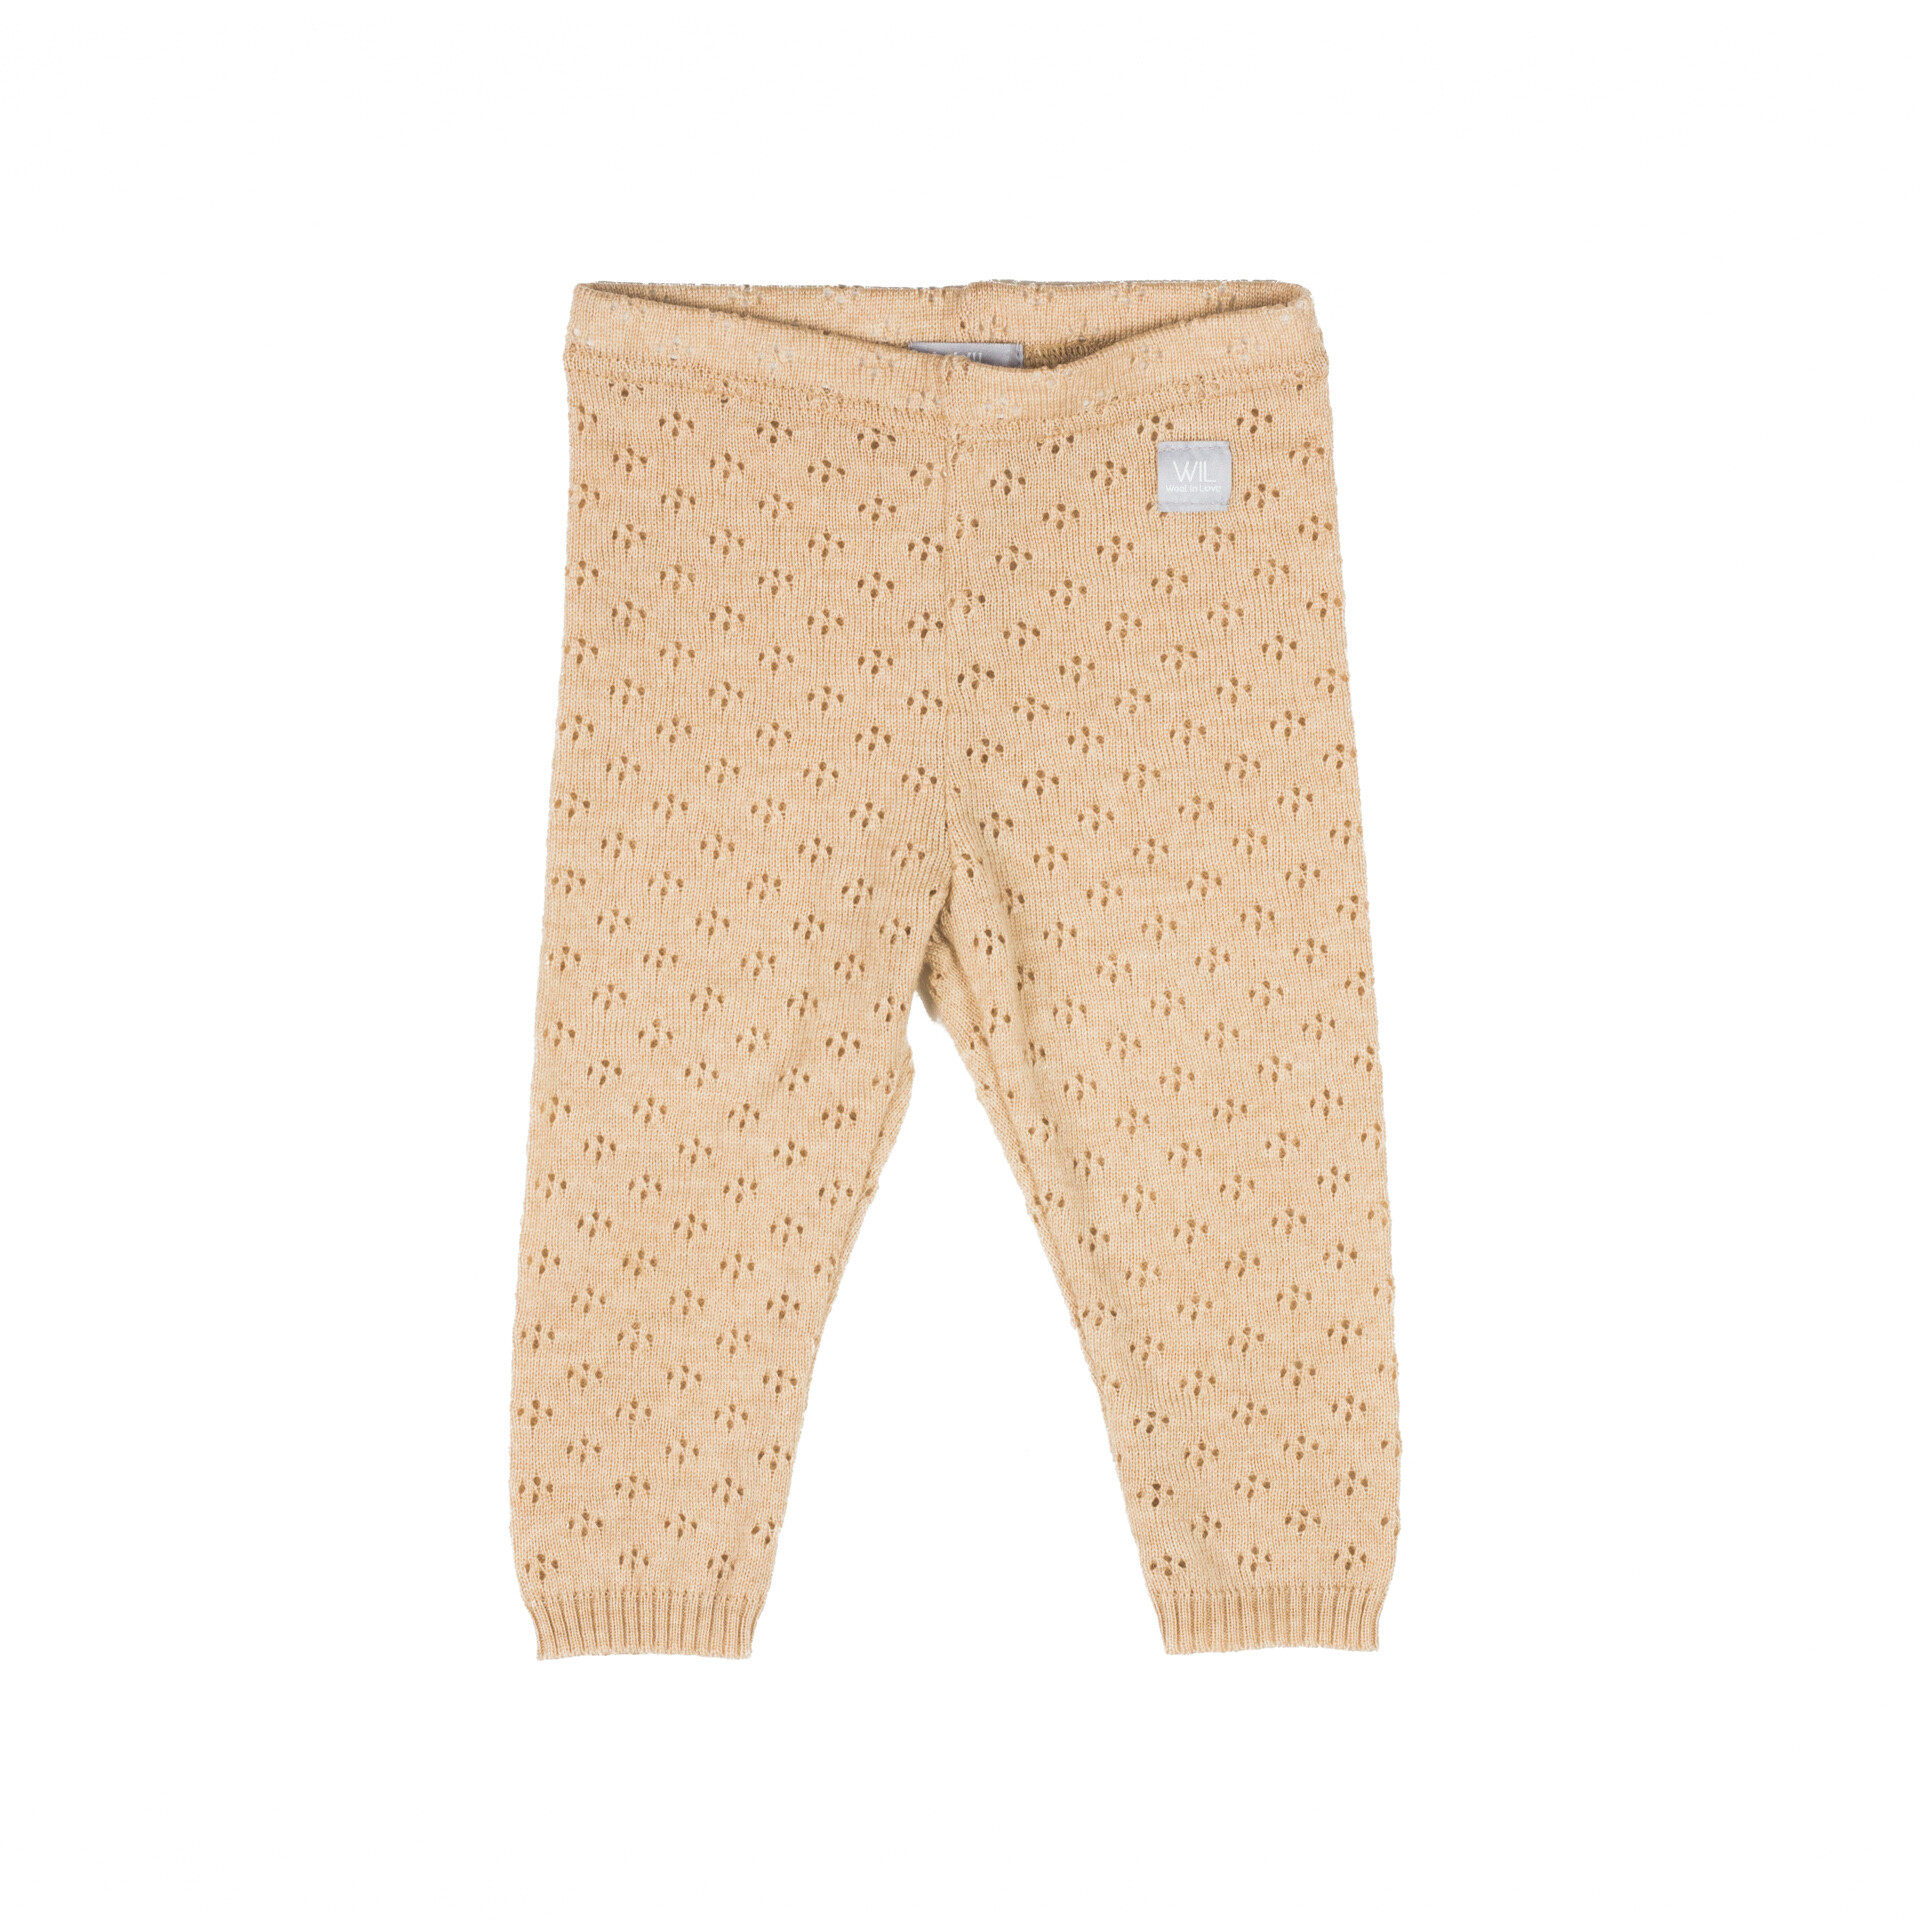 Light and lacy merino wool leggings for kids. Leggings are suitable to wear as thermal underwear but are beautiful as an outer layer.